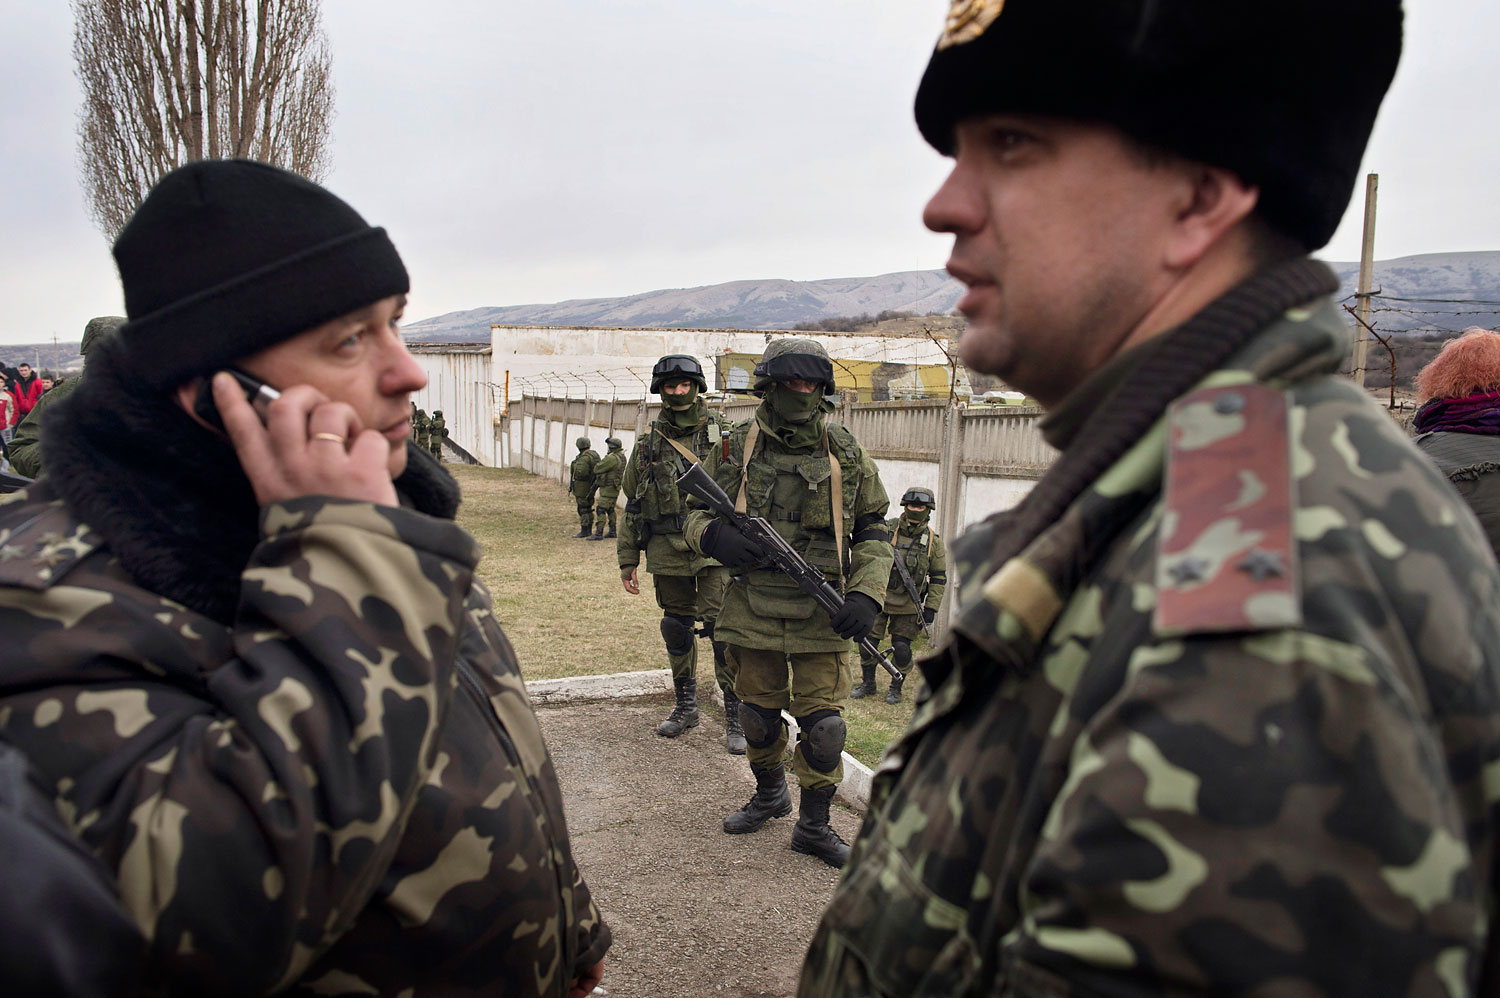 SIMFEROPOL, Ukraine March 03 2014The Ukrainian commander, Col. Sergei Starozhenko, 38, told reporters the unmarked troops had arrived about 5 a.m. and “they want to block the base.” He said he expected them to bring reinforcements and call for talks. Asked how many men he has at his command, he said simply, “Enough.” After 15 minutes of conversation with what appeared to be a Russian officer, he said, “There won’t be war,” and returned inside, while the standoff continued.